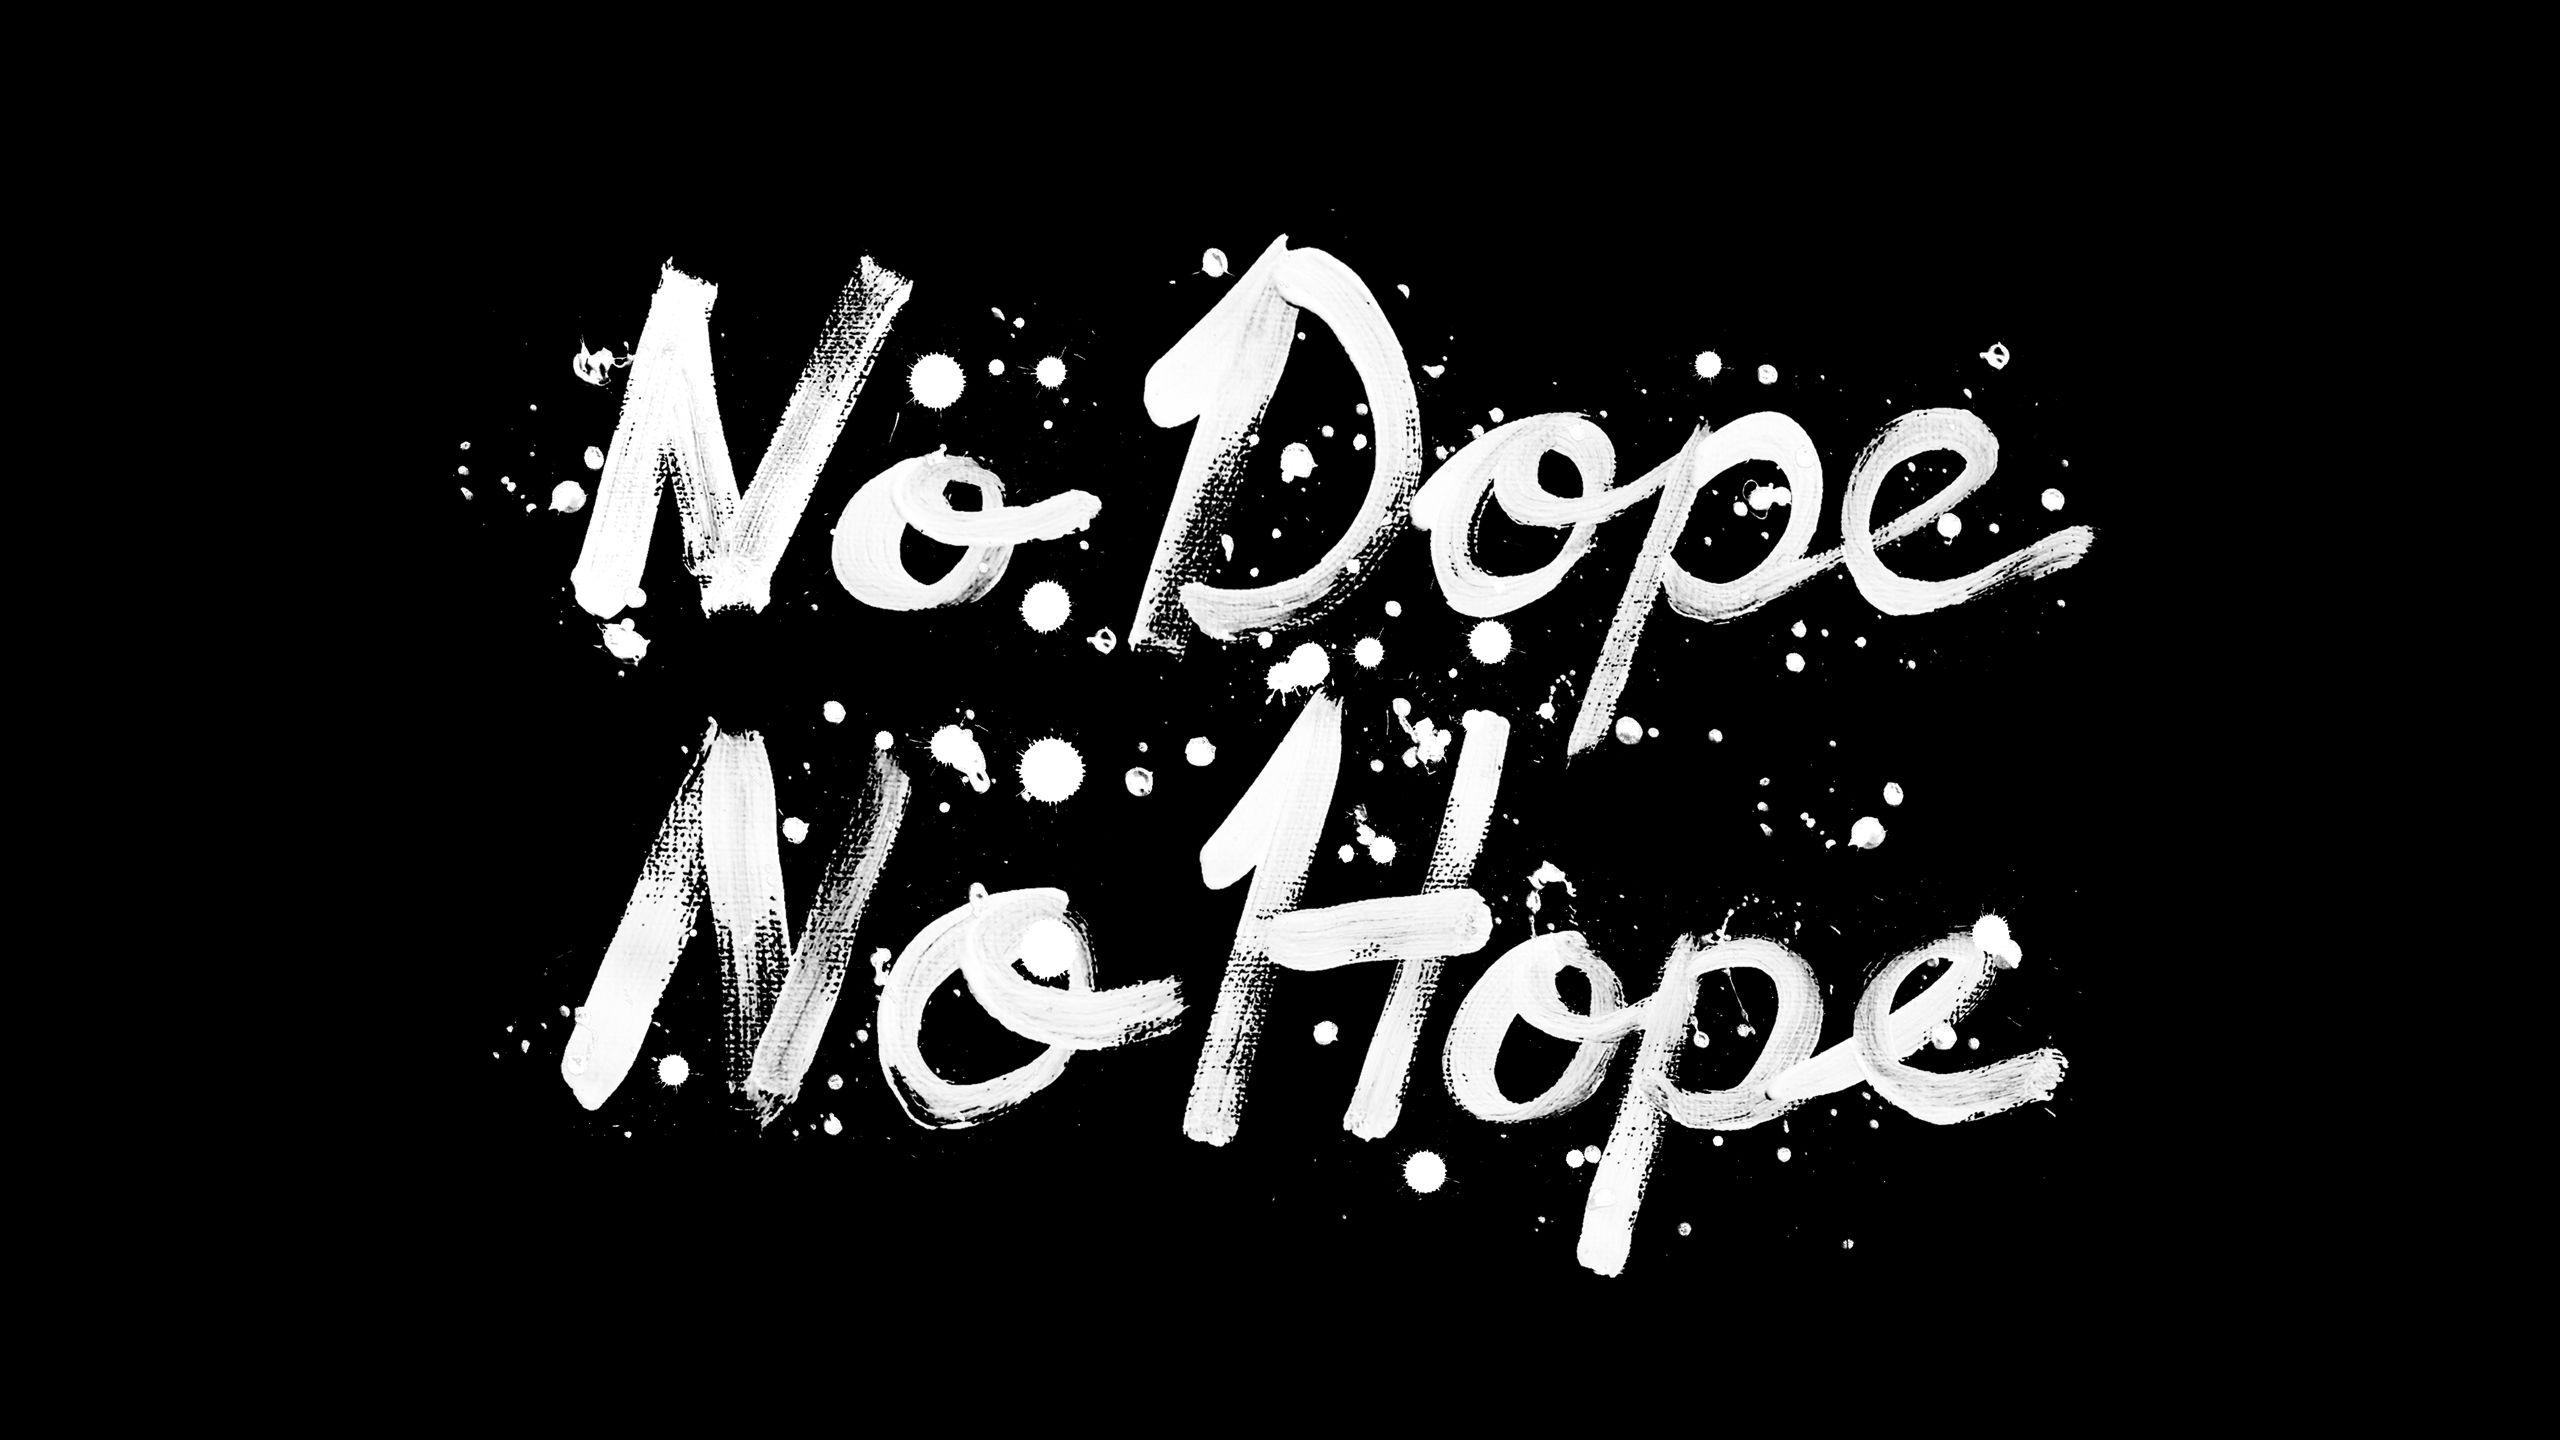 Download Free Dope Background Tumblr